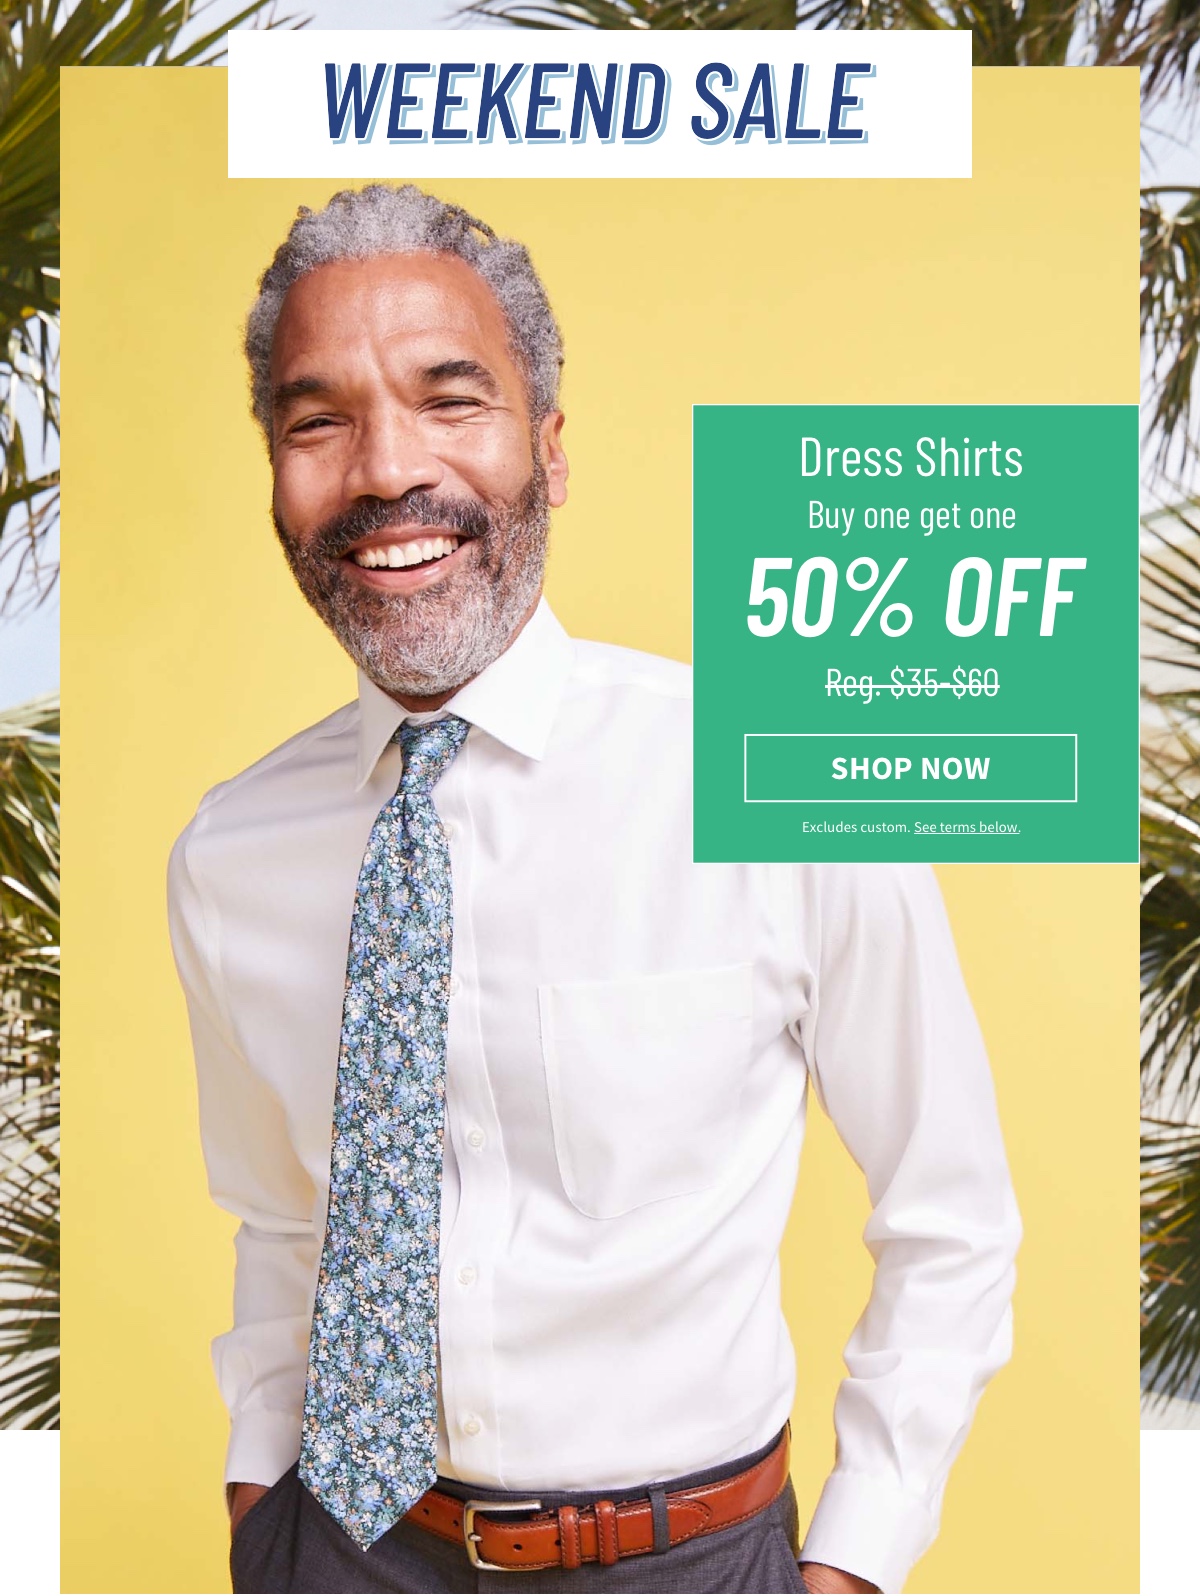 Shop our Weekend Sale for Dress Shirts buy one get one 50% off